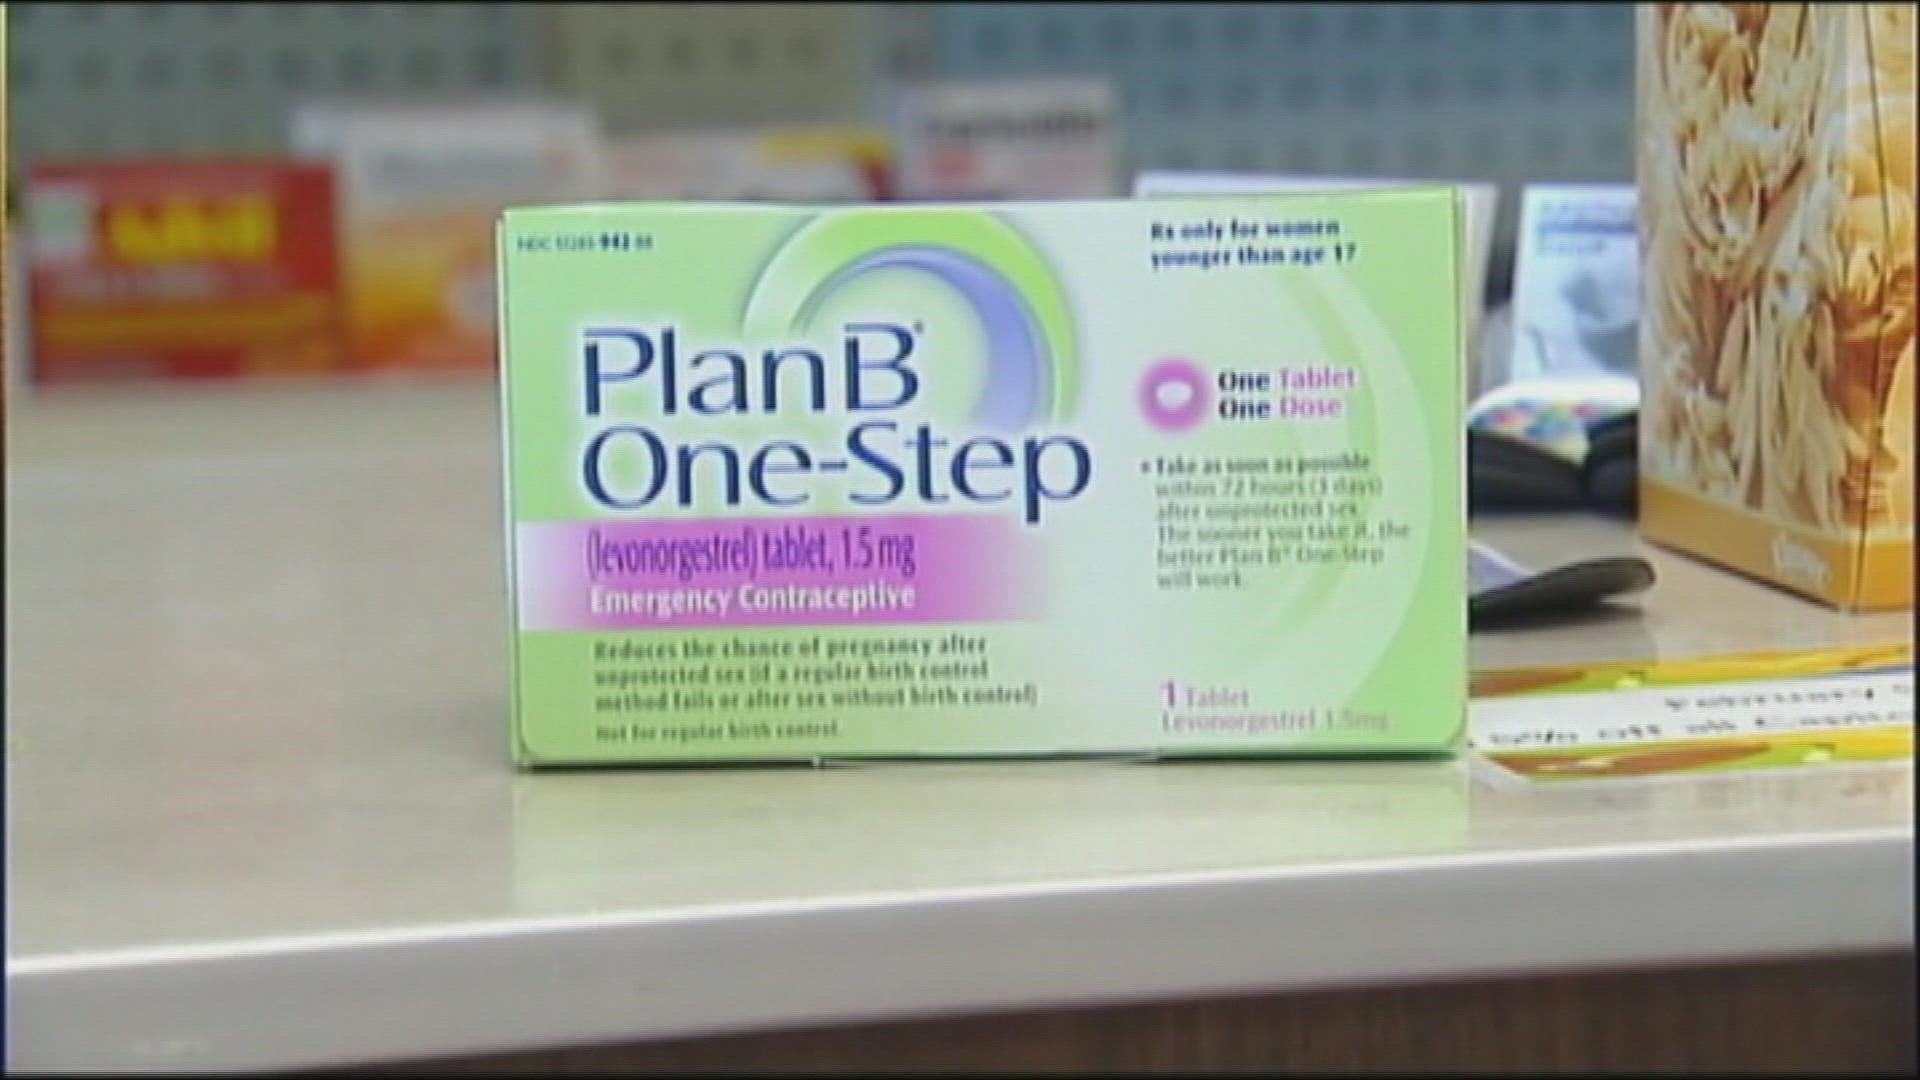 Women over 165 pounds may not get protection from Plan B emergency contraception.